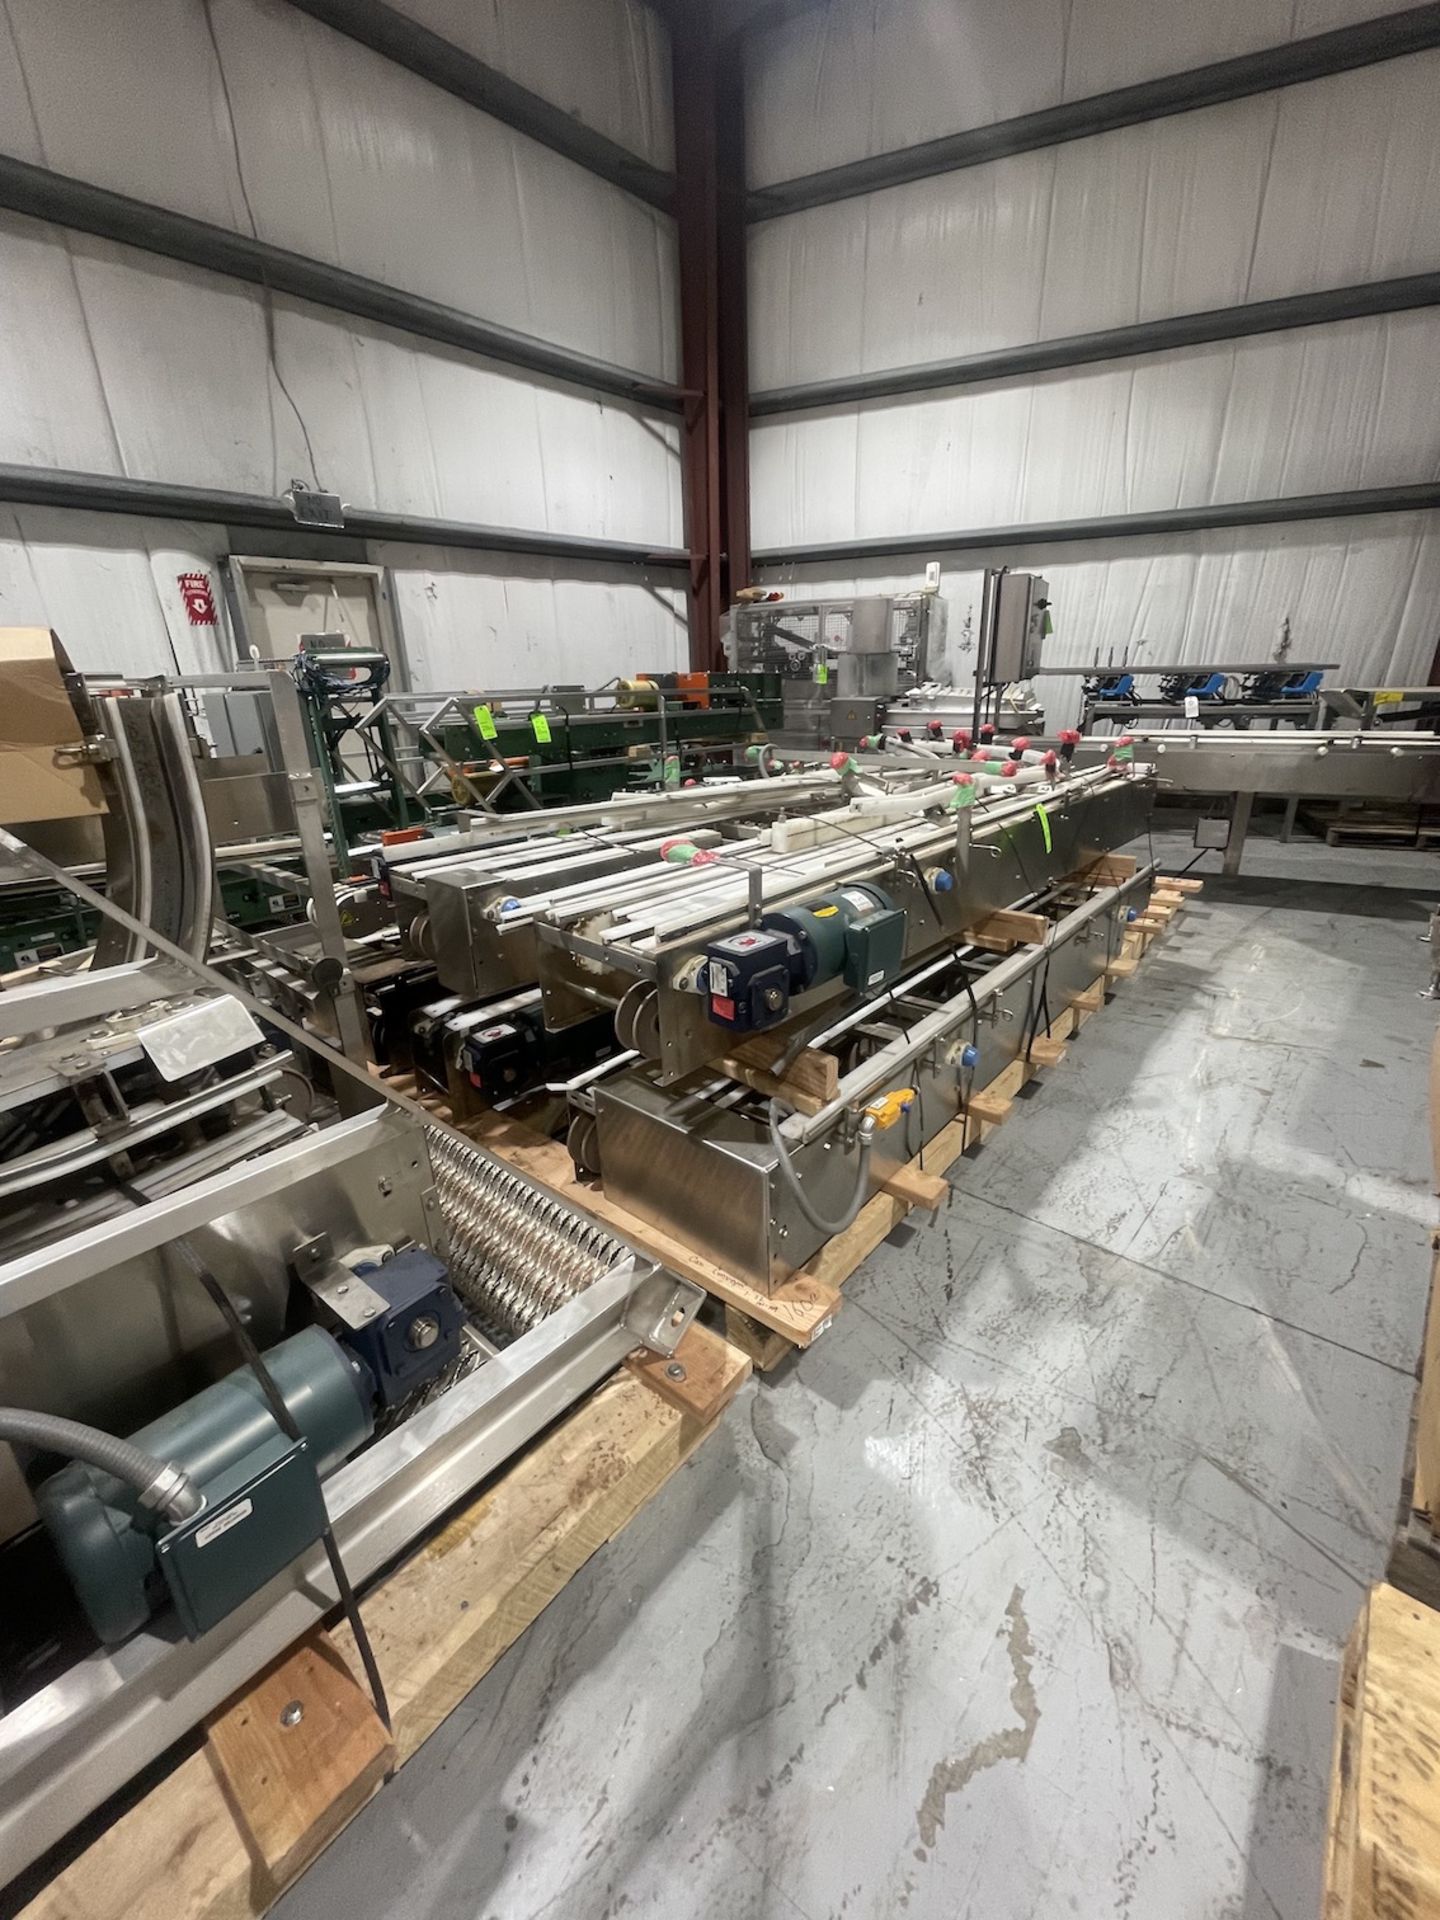 CAN CONVEYOR SYSTEMS (2019 MFG) (Loading, Handling & Site Management Fee: $1250.00)